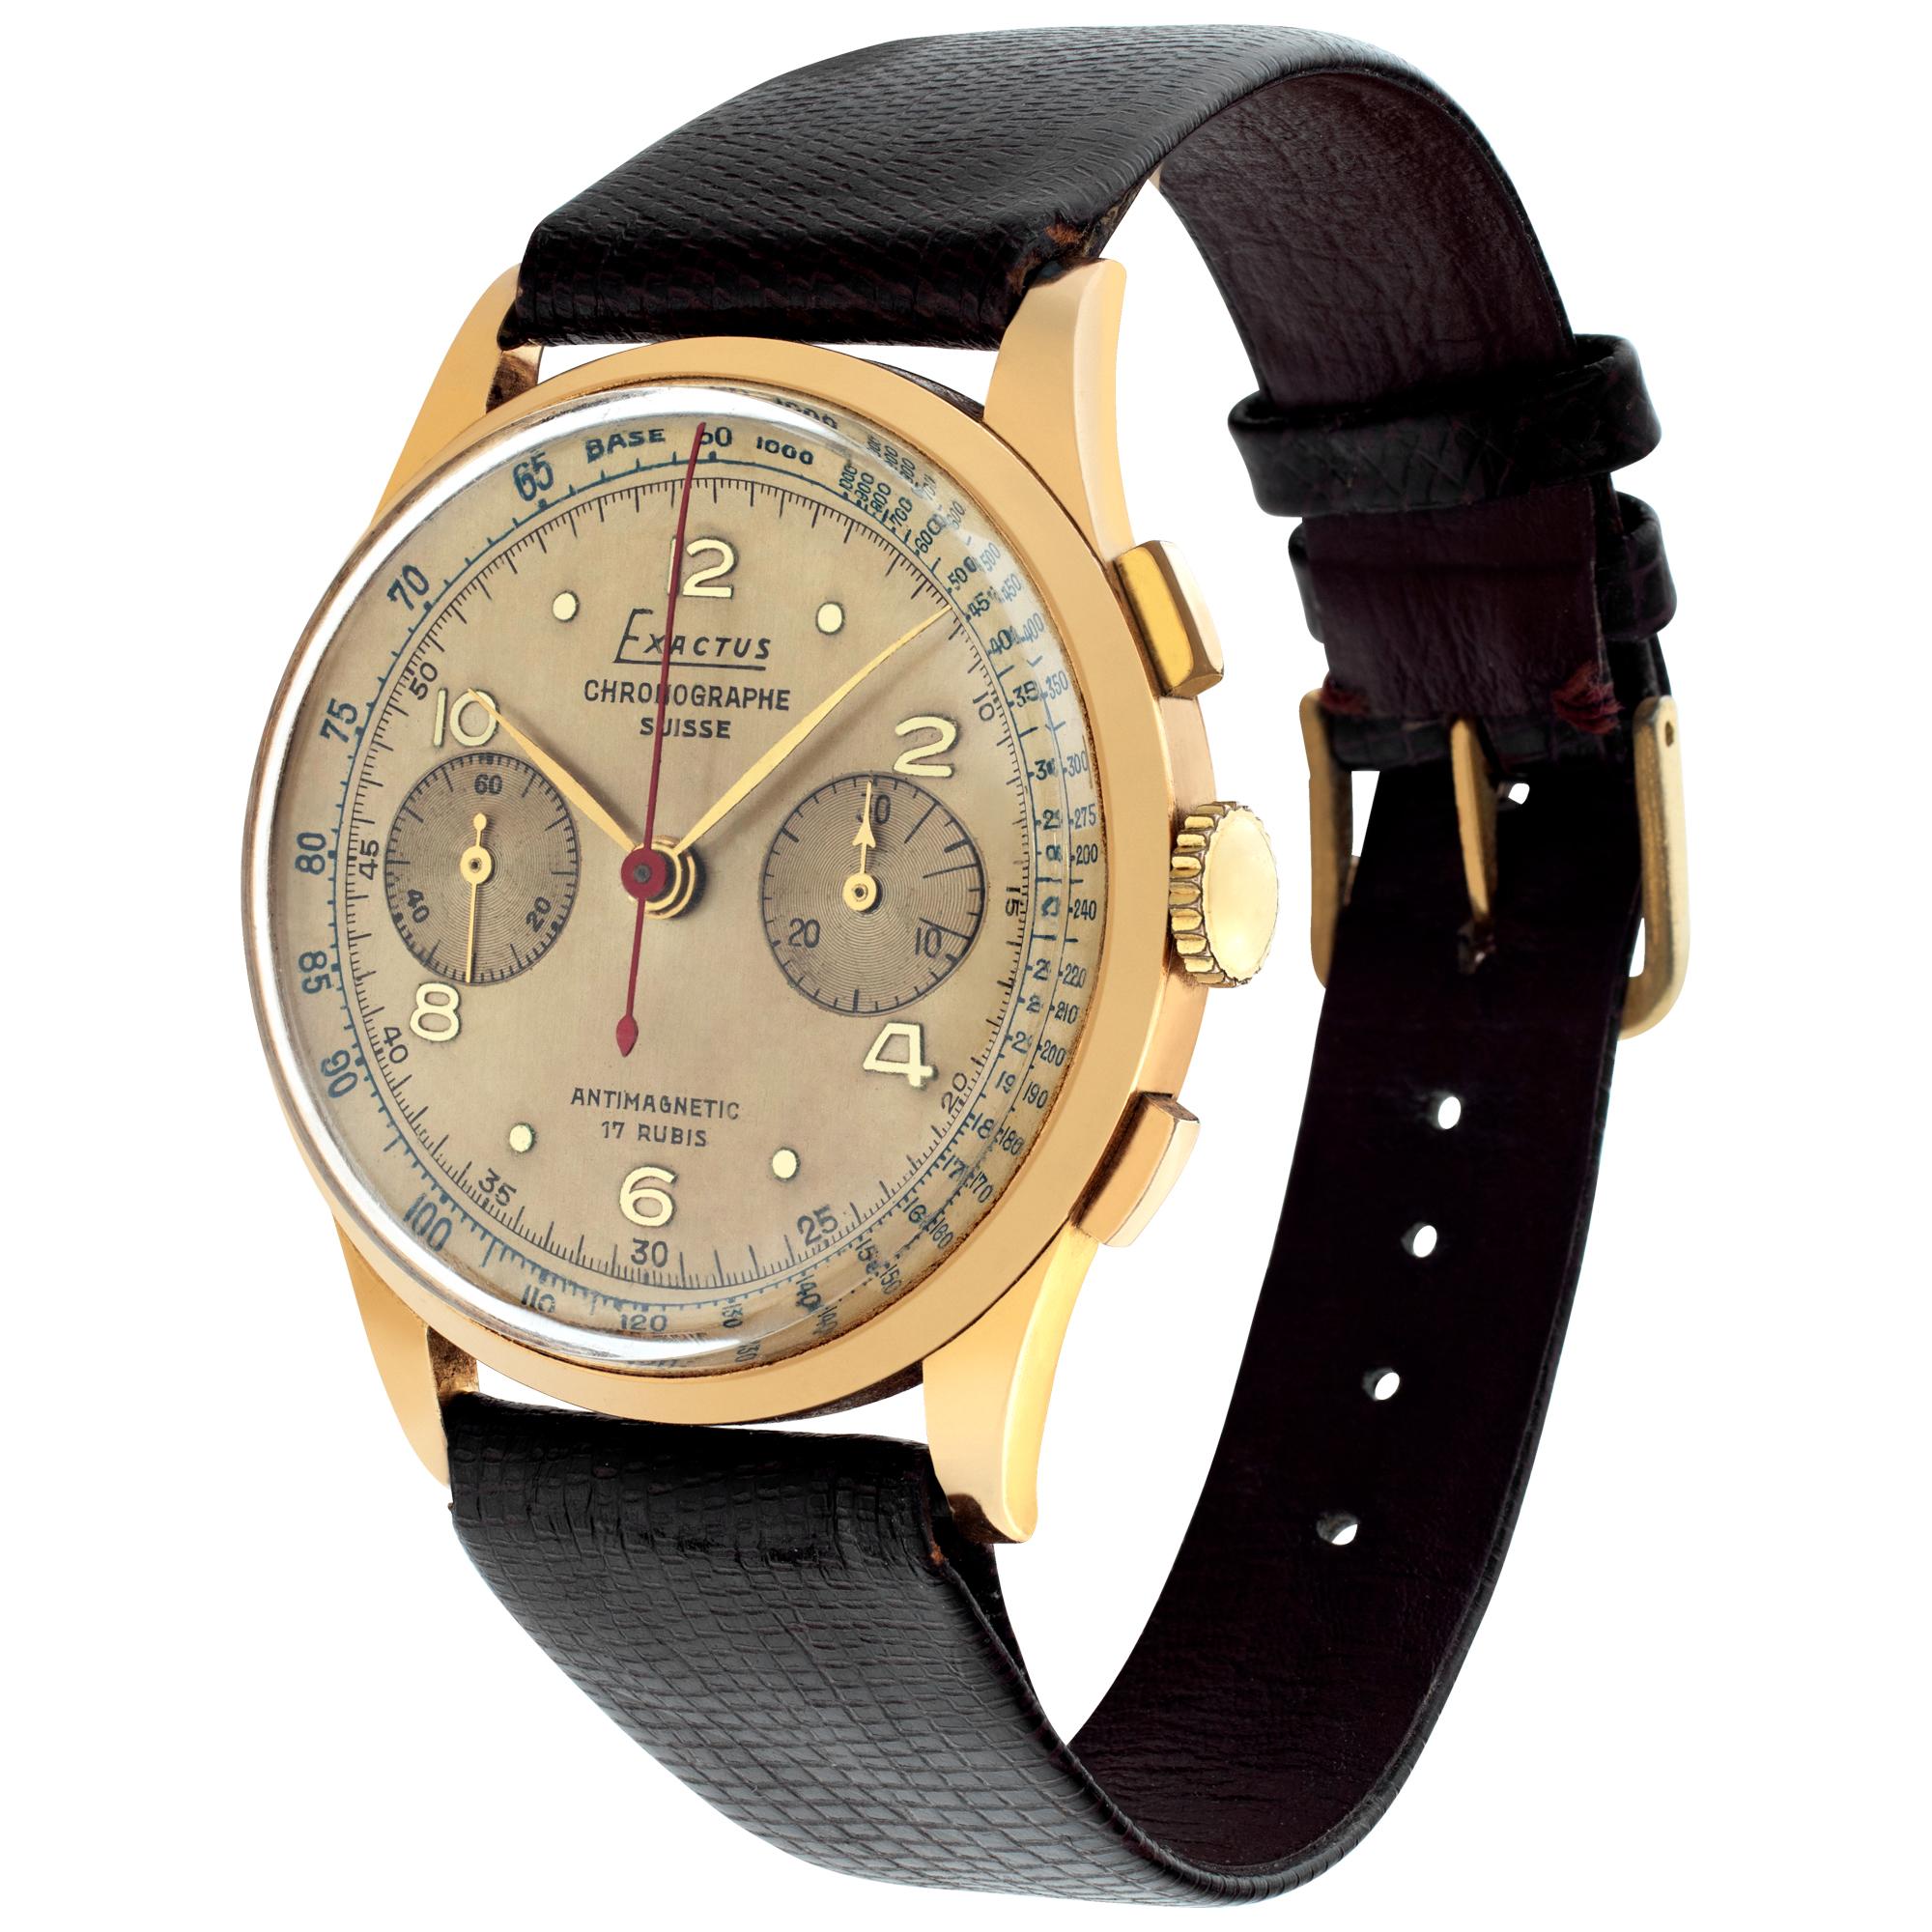 Vintage Exactus Chronograph in 18k on brown lizard strap with plaque tang buckle. Manual w/ subseconds and chronograph. 37 mm case size. Circa 1960s. Fine Pre-owned Exactus Watch. Certified preowned Vintage Exactus Chronograph watch is made out of